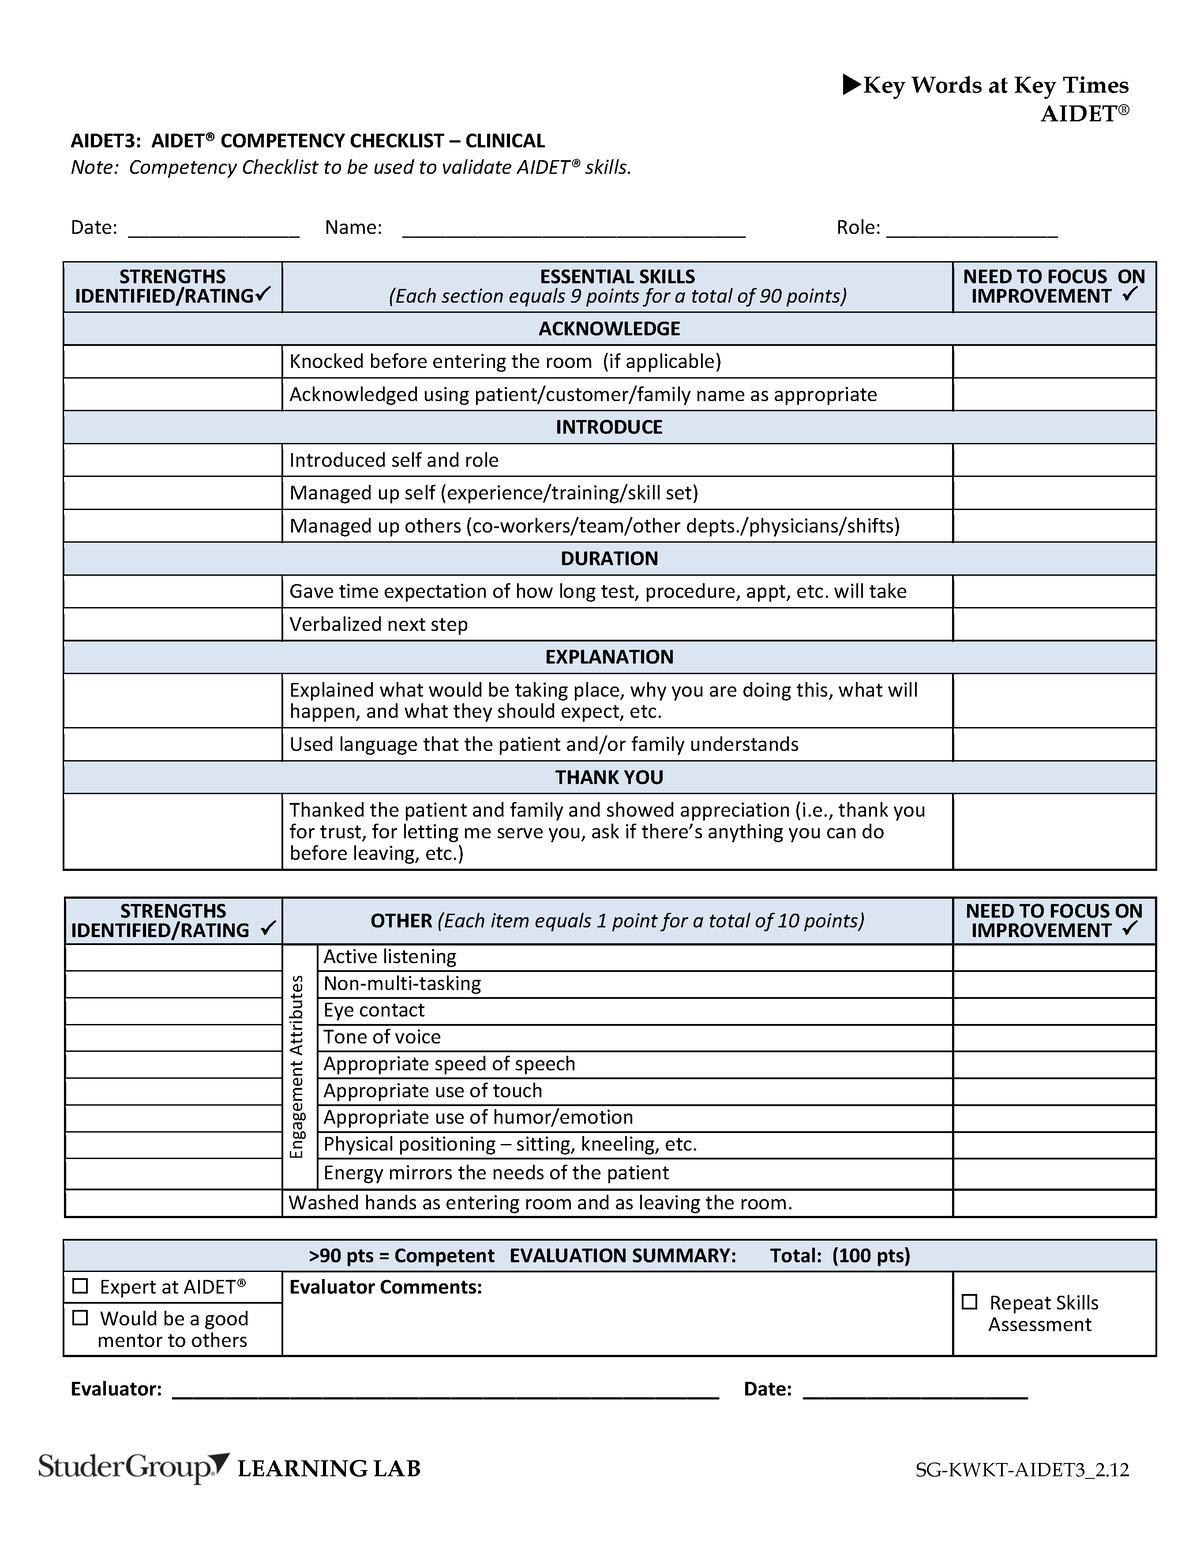 Aidet Competency Checklist - Clinical ( Aidet 3) - Key Words at Key ...